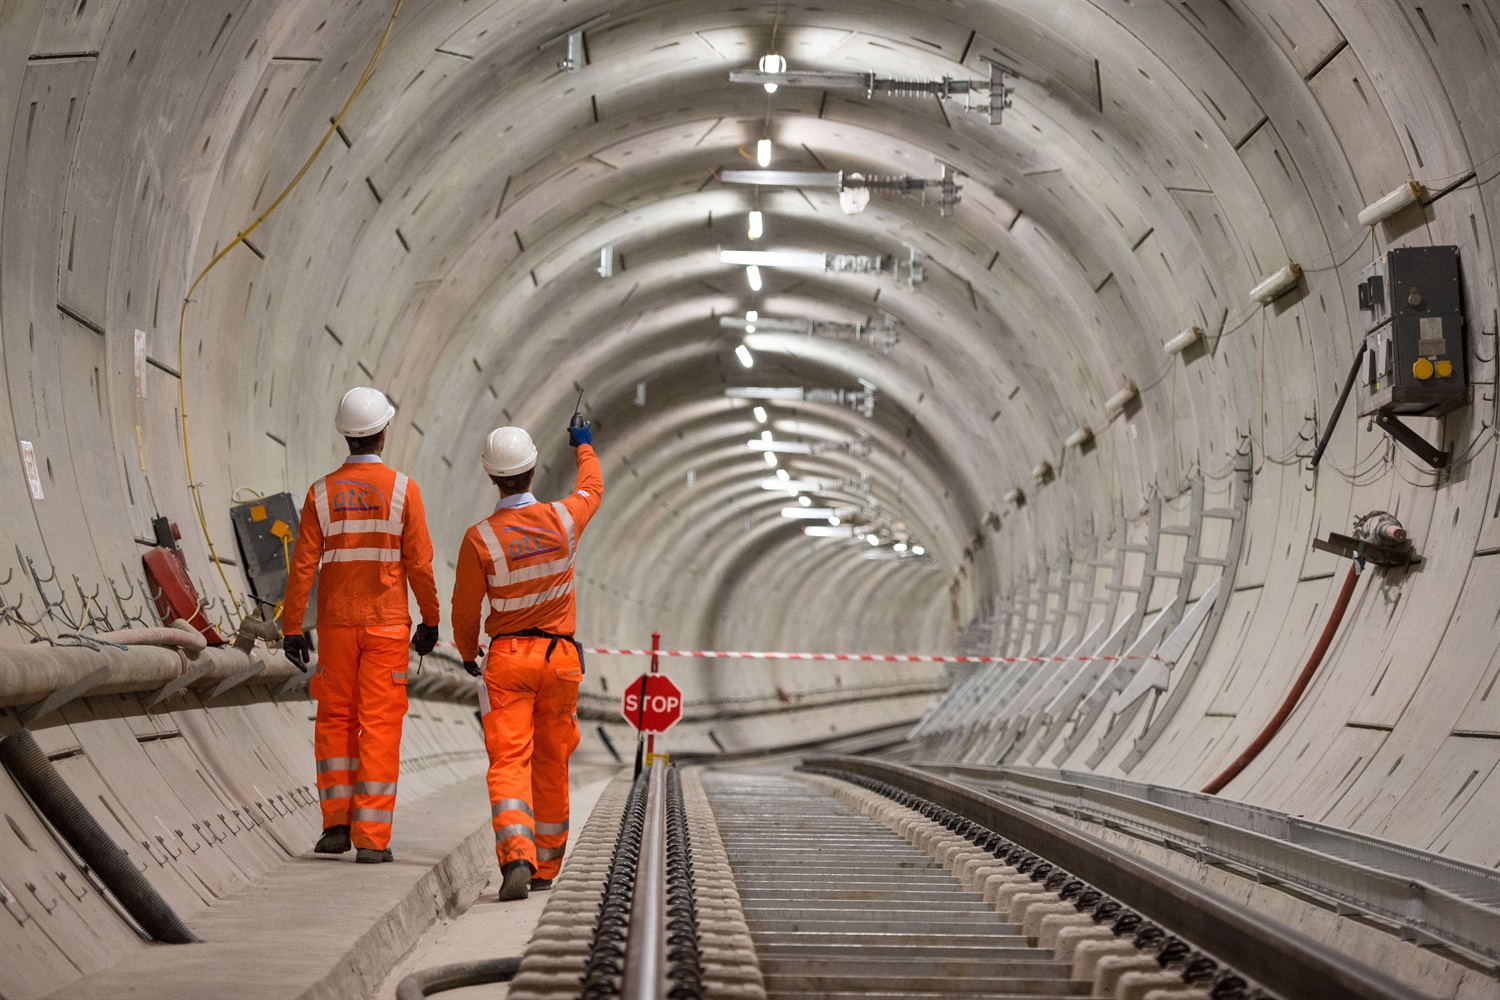 Around £20m in revenue could be lost due to Crossrail opening delay